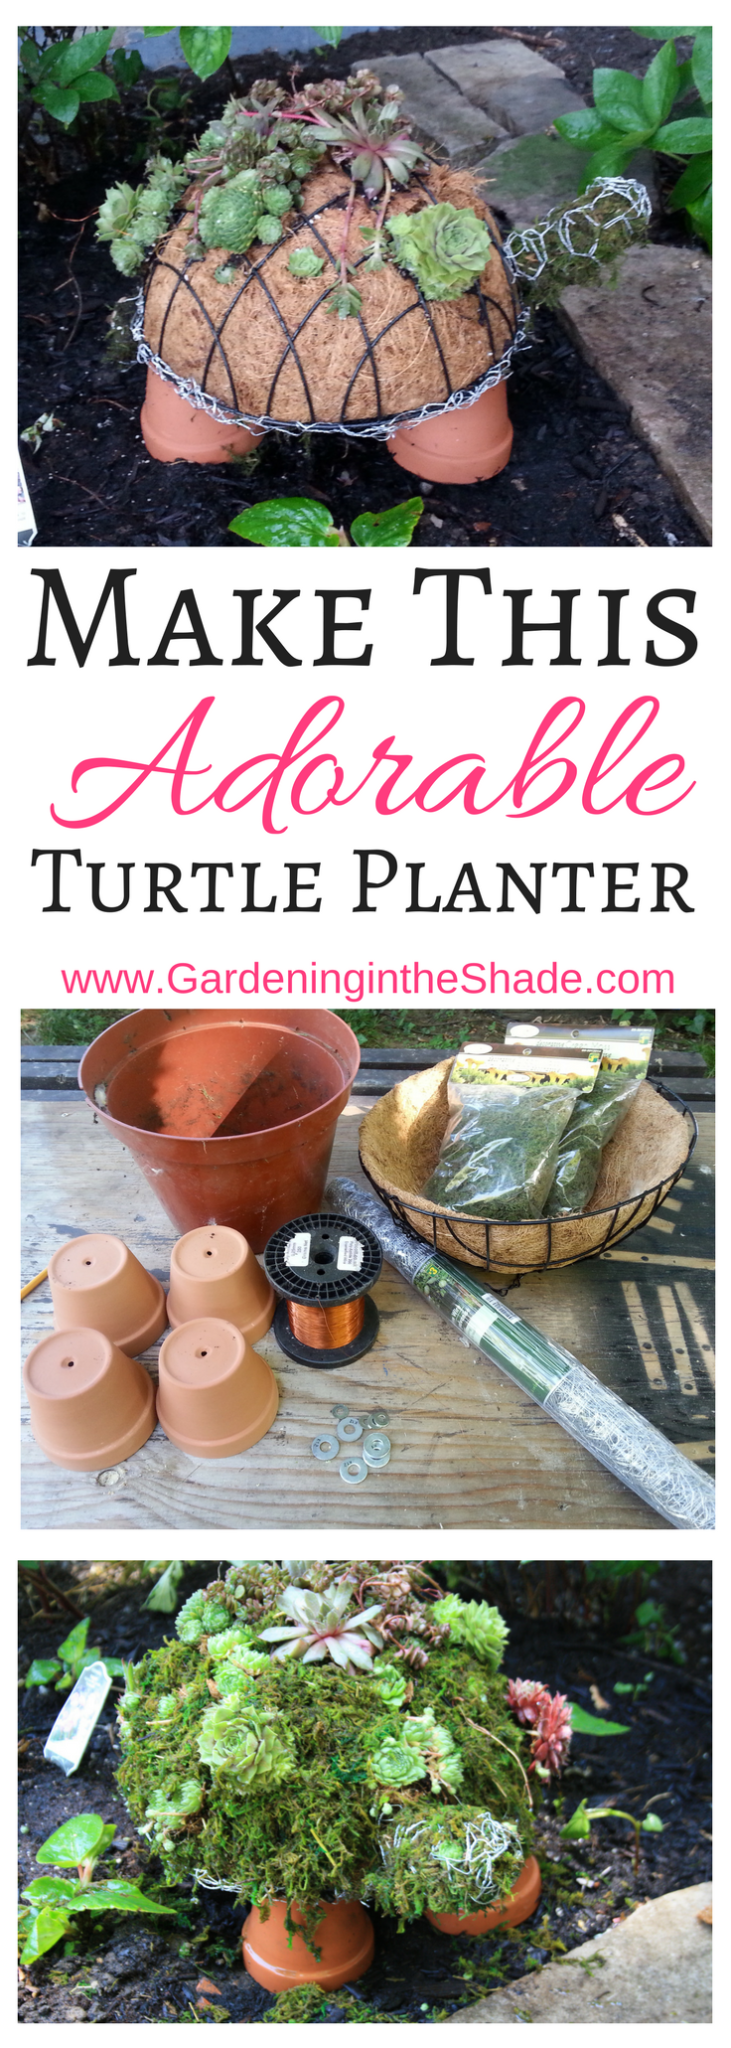 See how easy it is to make this turtle succulent planter for your garden!